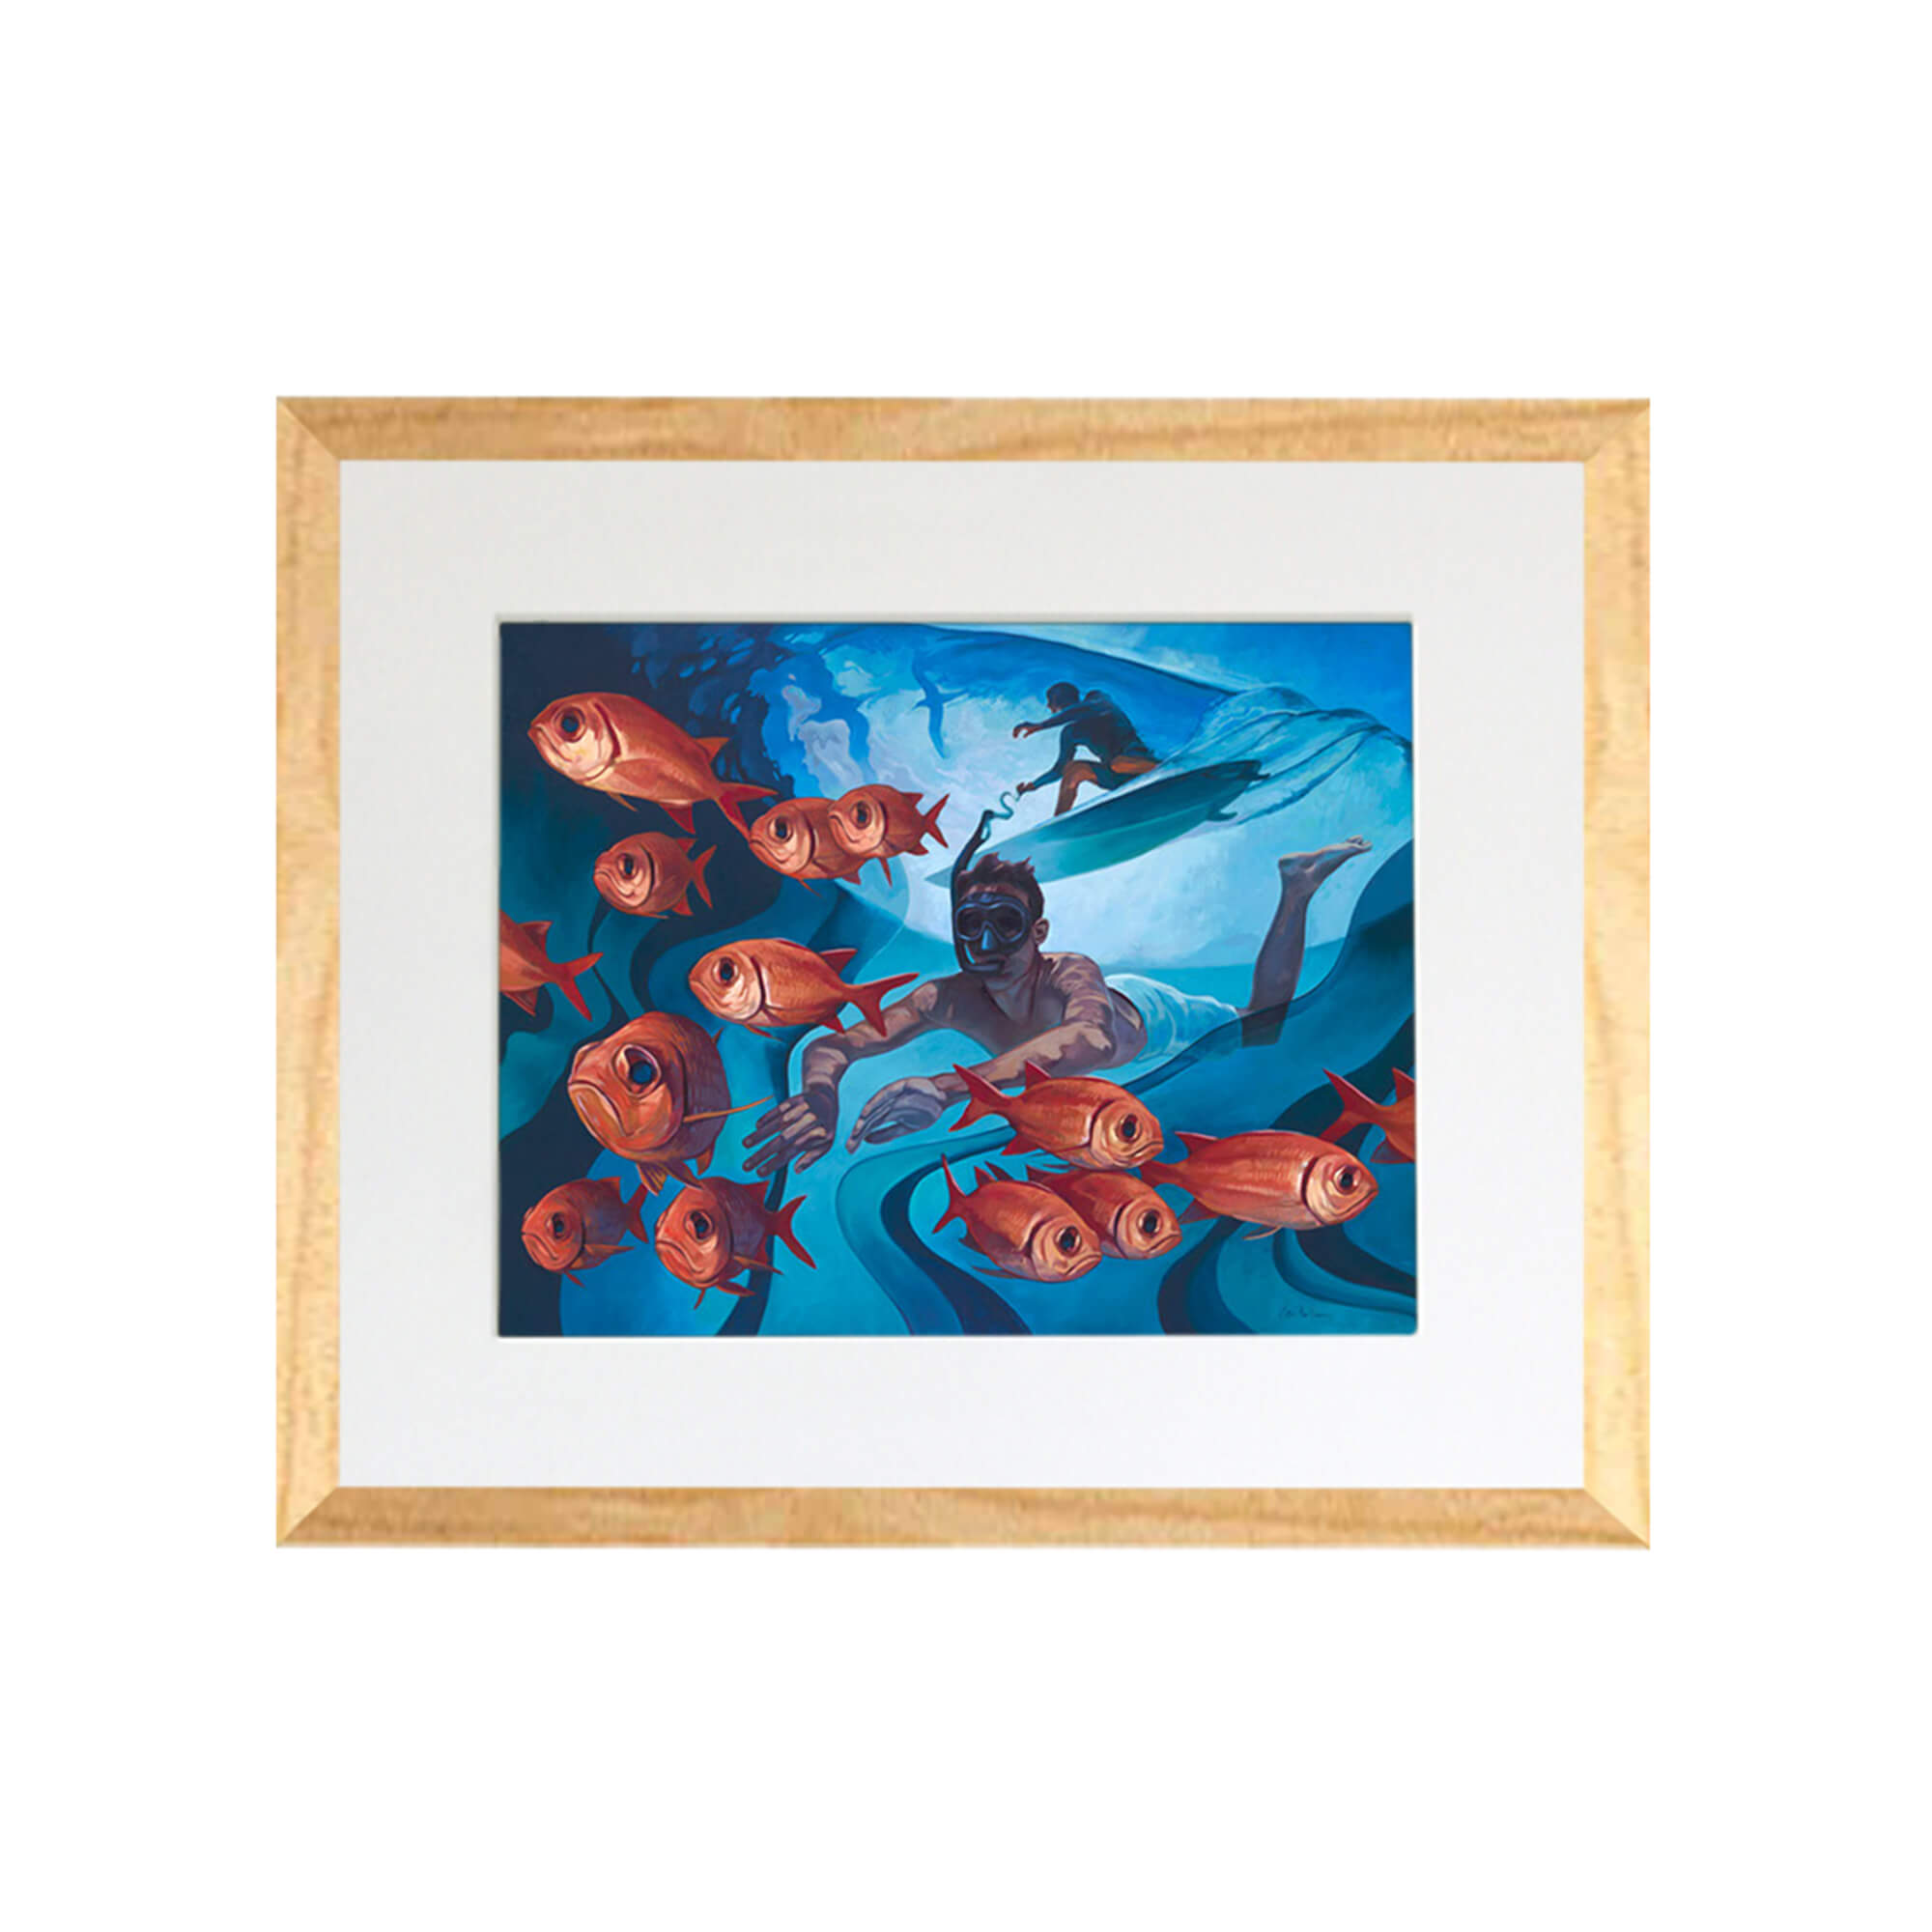 A school of red fish by Hawaii artist Colin Redican